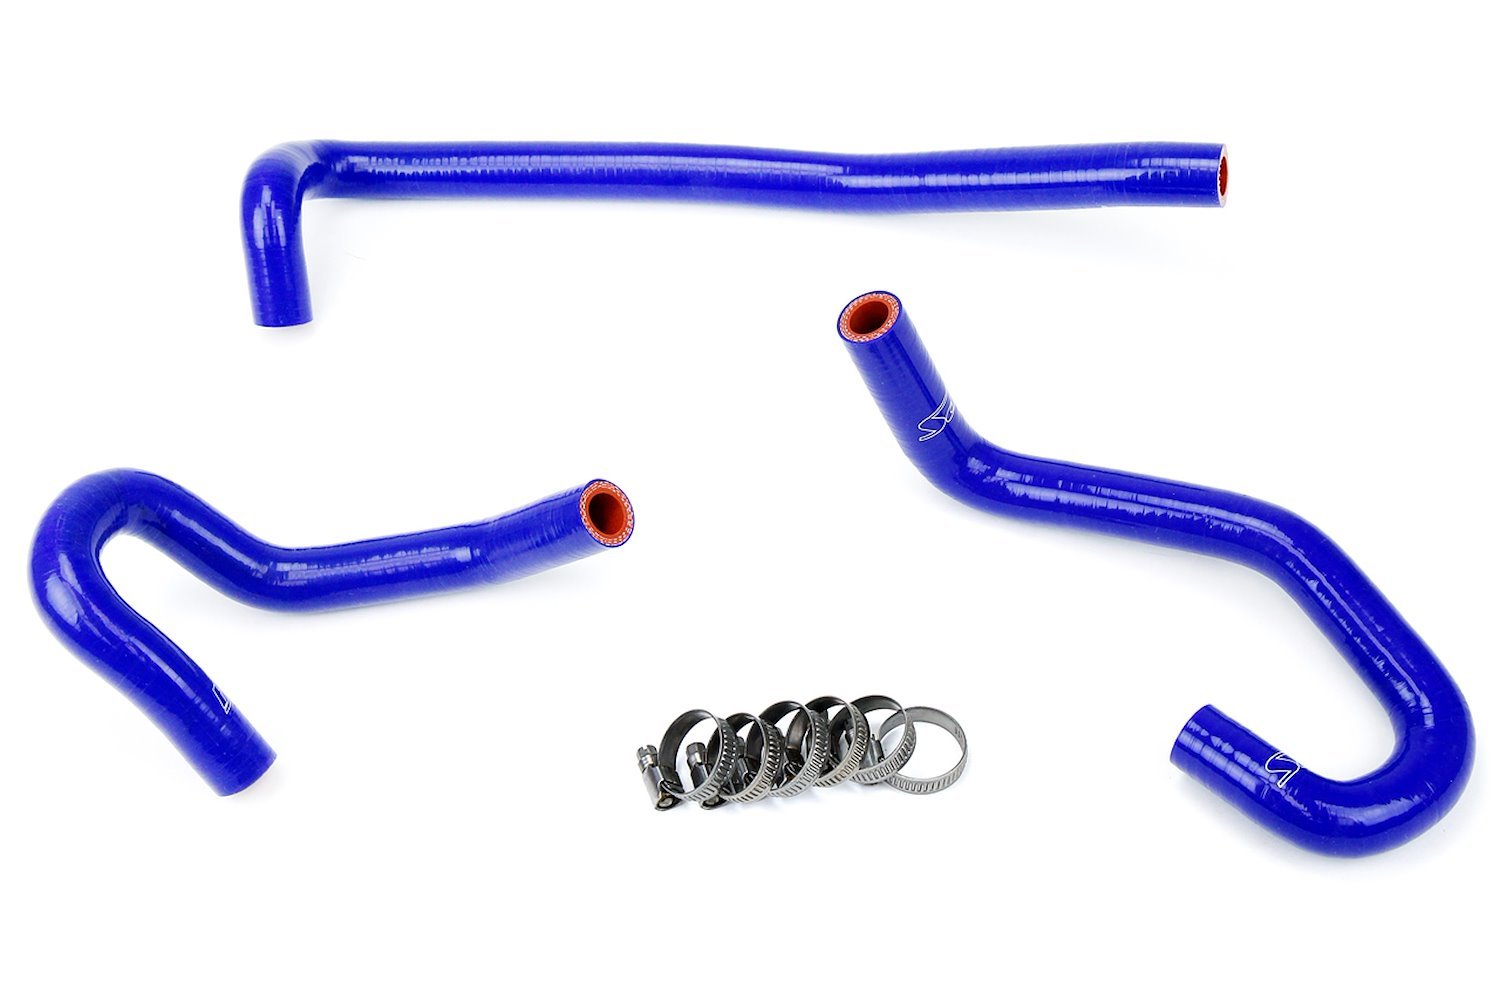 57-1340-BLUE Heater Hose Kit, High-Temp 3-Ply Reinforced Silicone, Replace OEM Rubber Heater Coolant Hoses